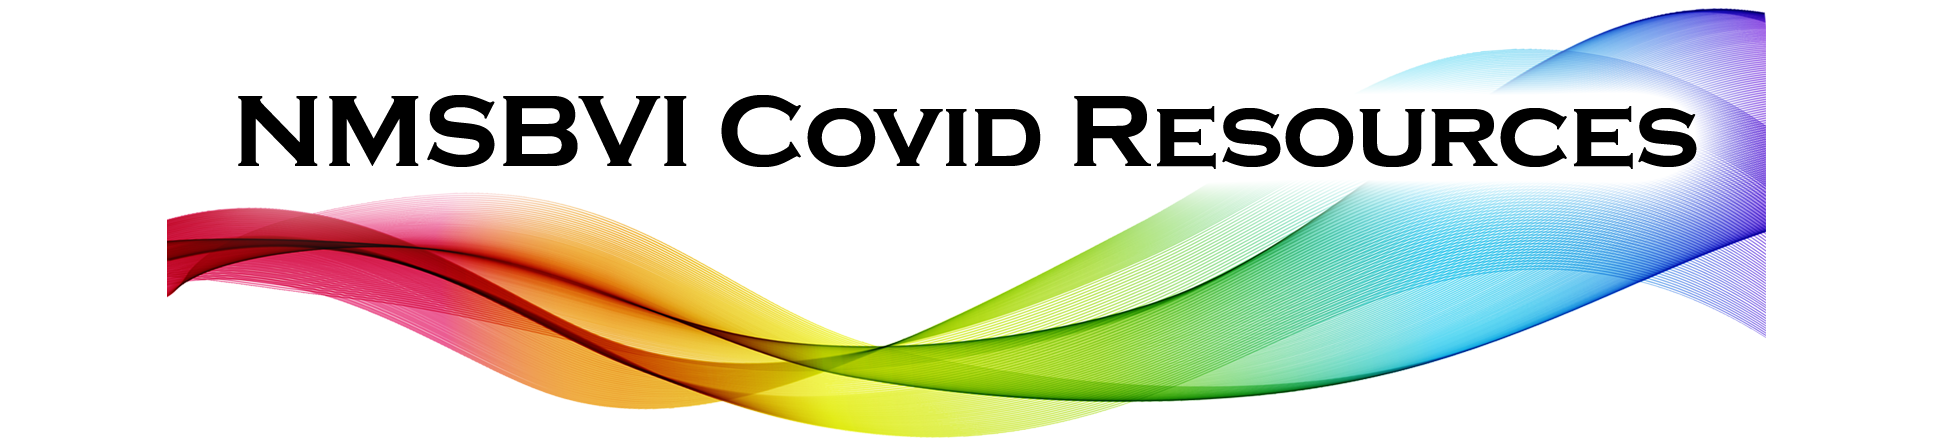 NMSBVI Covid resources